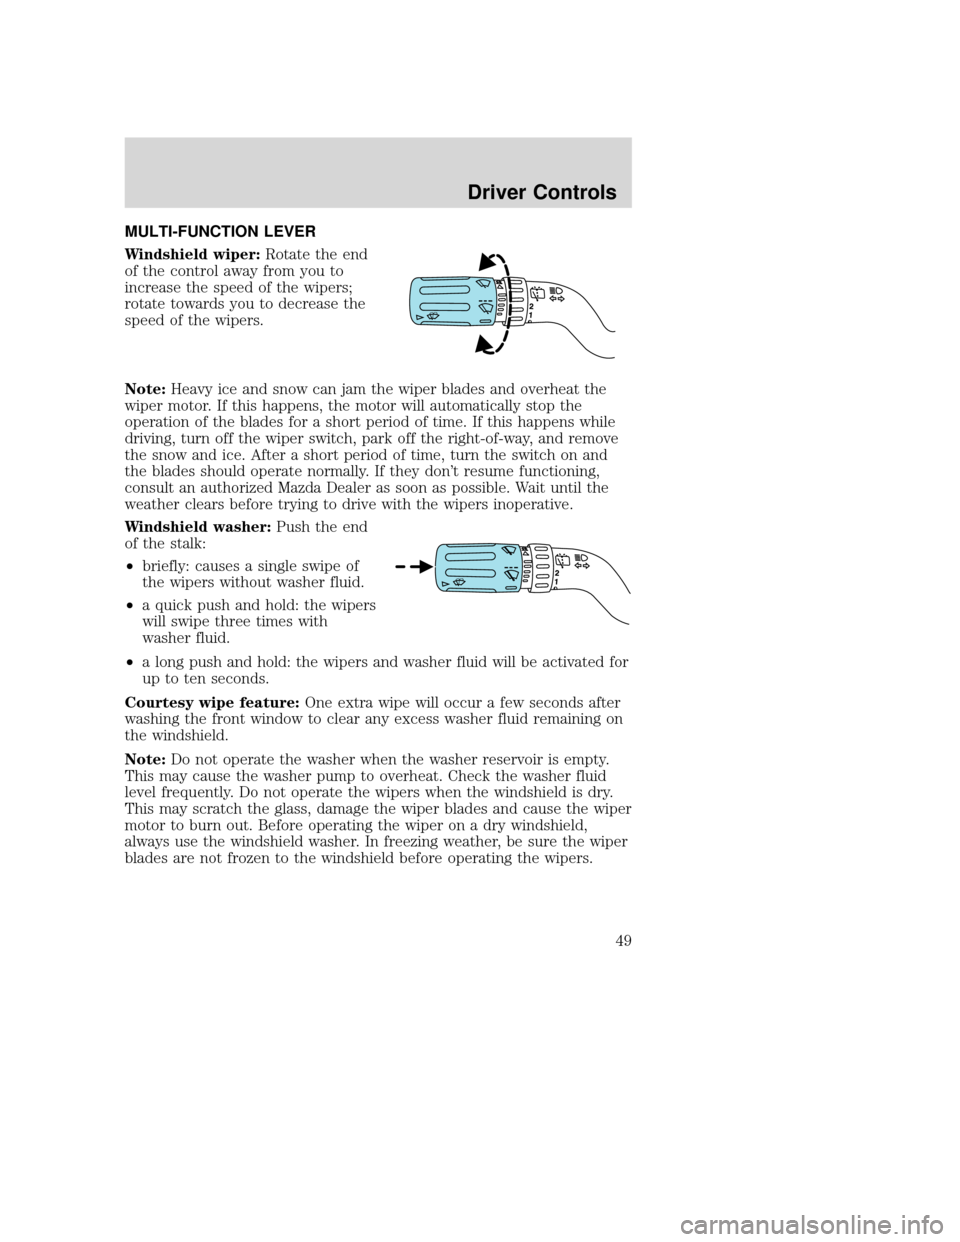 MAZDA MODEL TRIBUTE 2009  Owners Manual (in English) MULTI-FUNCTION LEVER
Windshield wiper:Rotate the end
of the control away from you to
increase the speed of the wipers;
rotate towards you to decrease the
speed of the wipers.
Note: Heavy ice and snow 